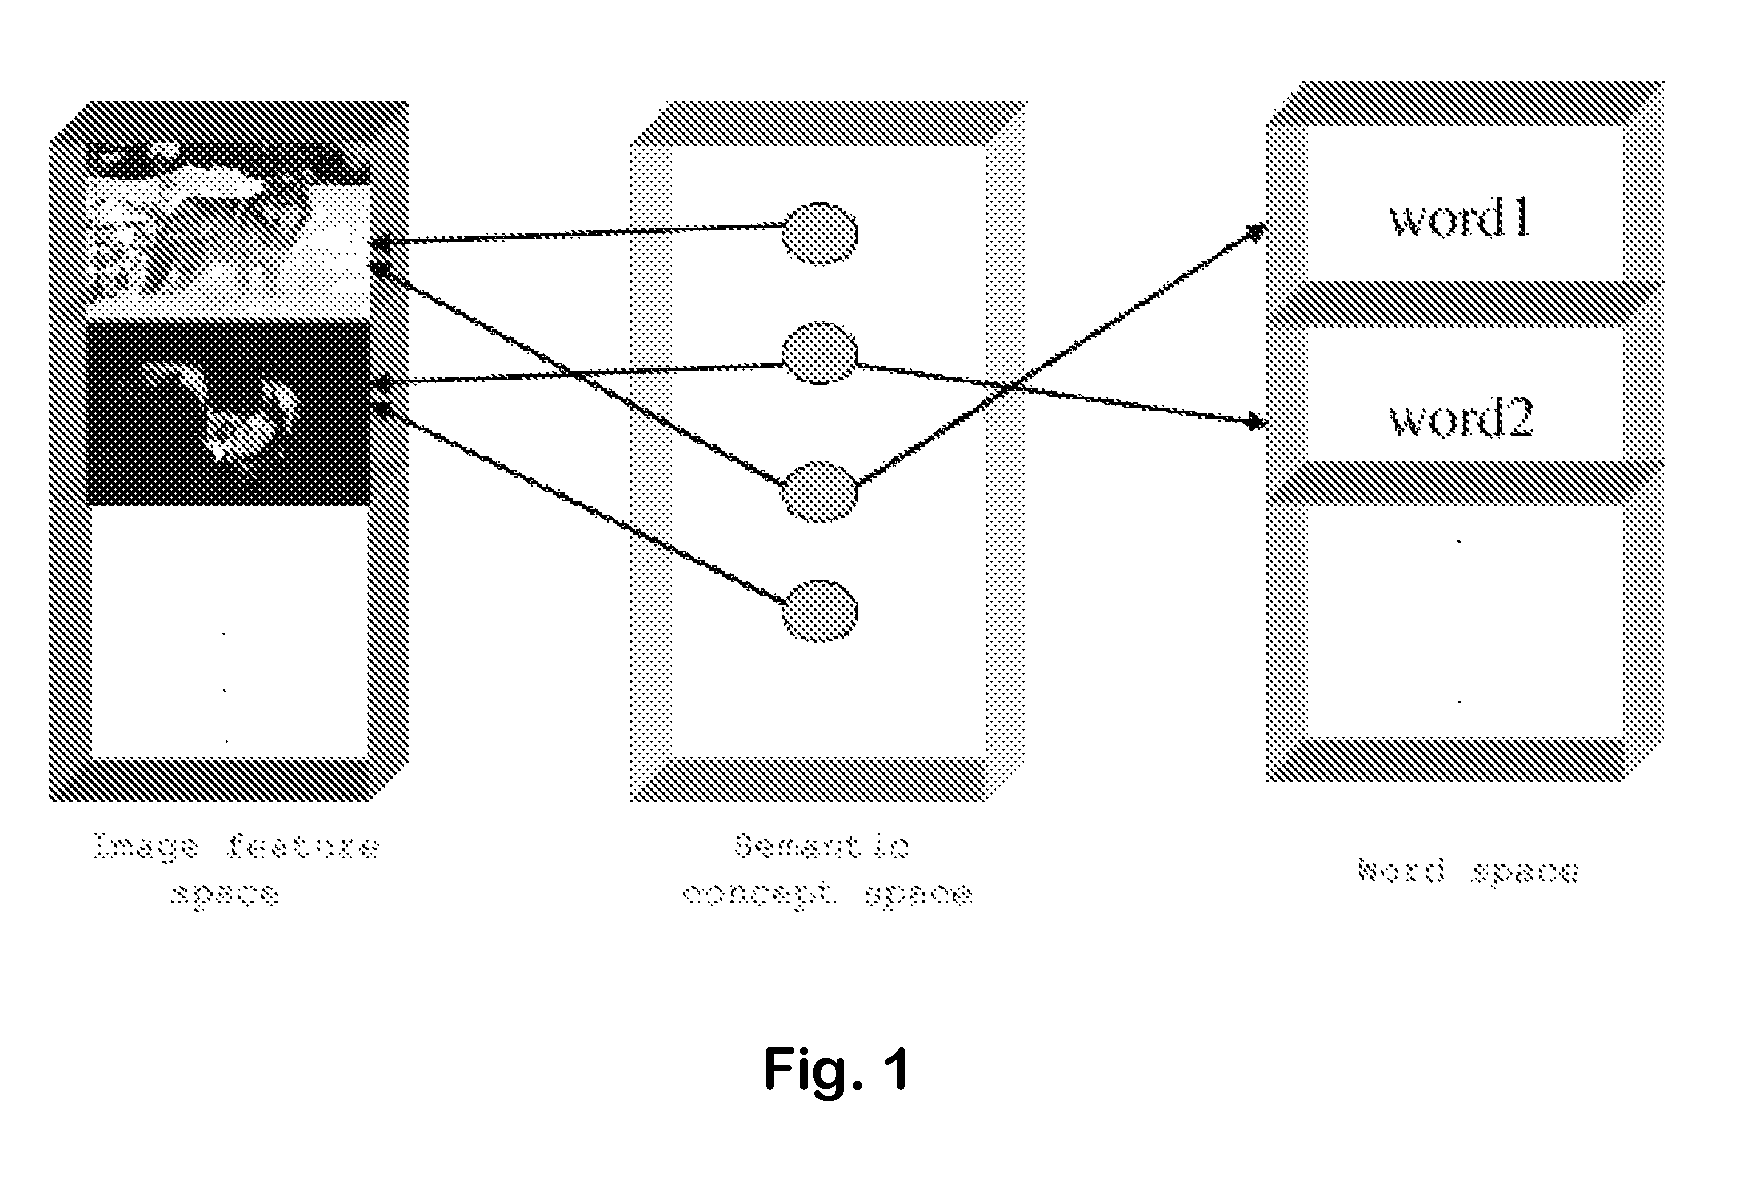 System and method for image annotation and multi-modal image retrieval using probabilistic semantic models